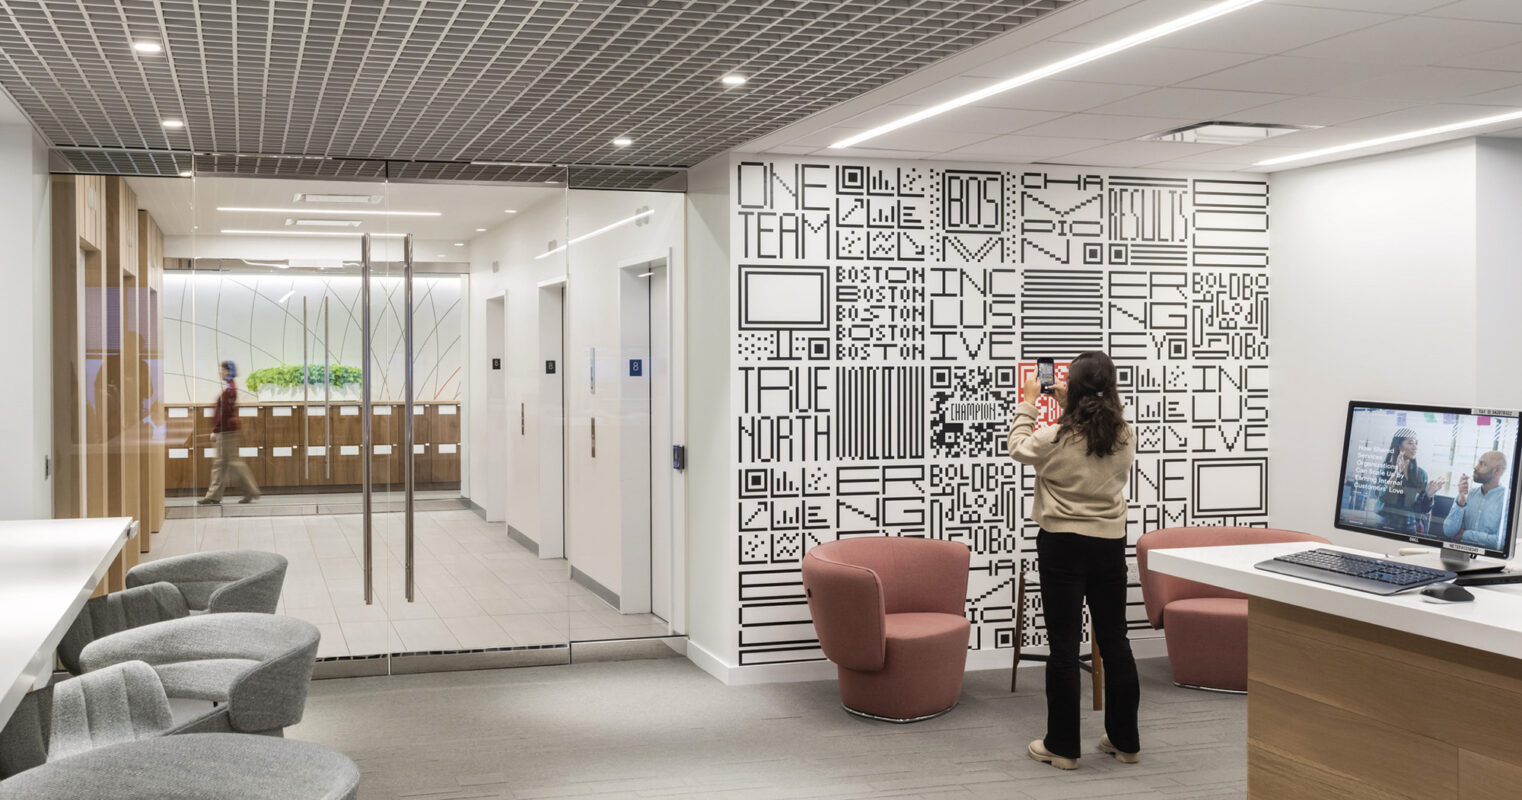 Modern office lobby with stylish interior design, featuring an artistic wall with typographic décor, comfortable seating area, and two individuals engaging with a video conference on a large screen.